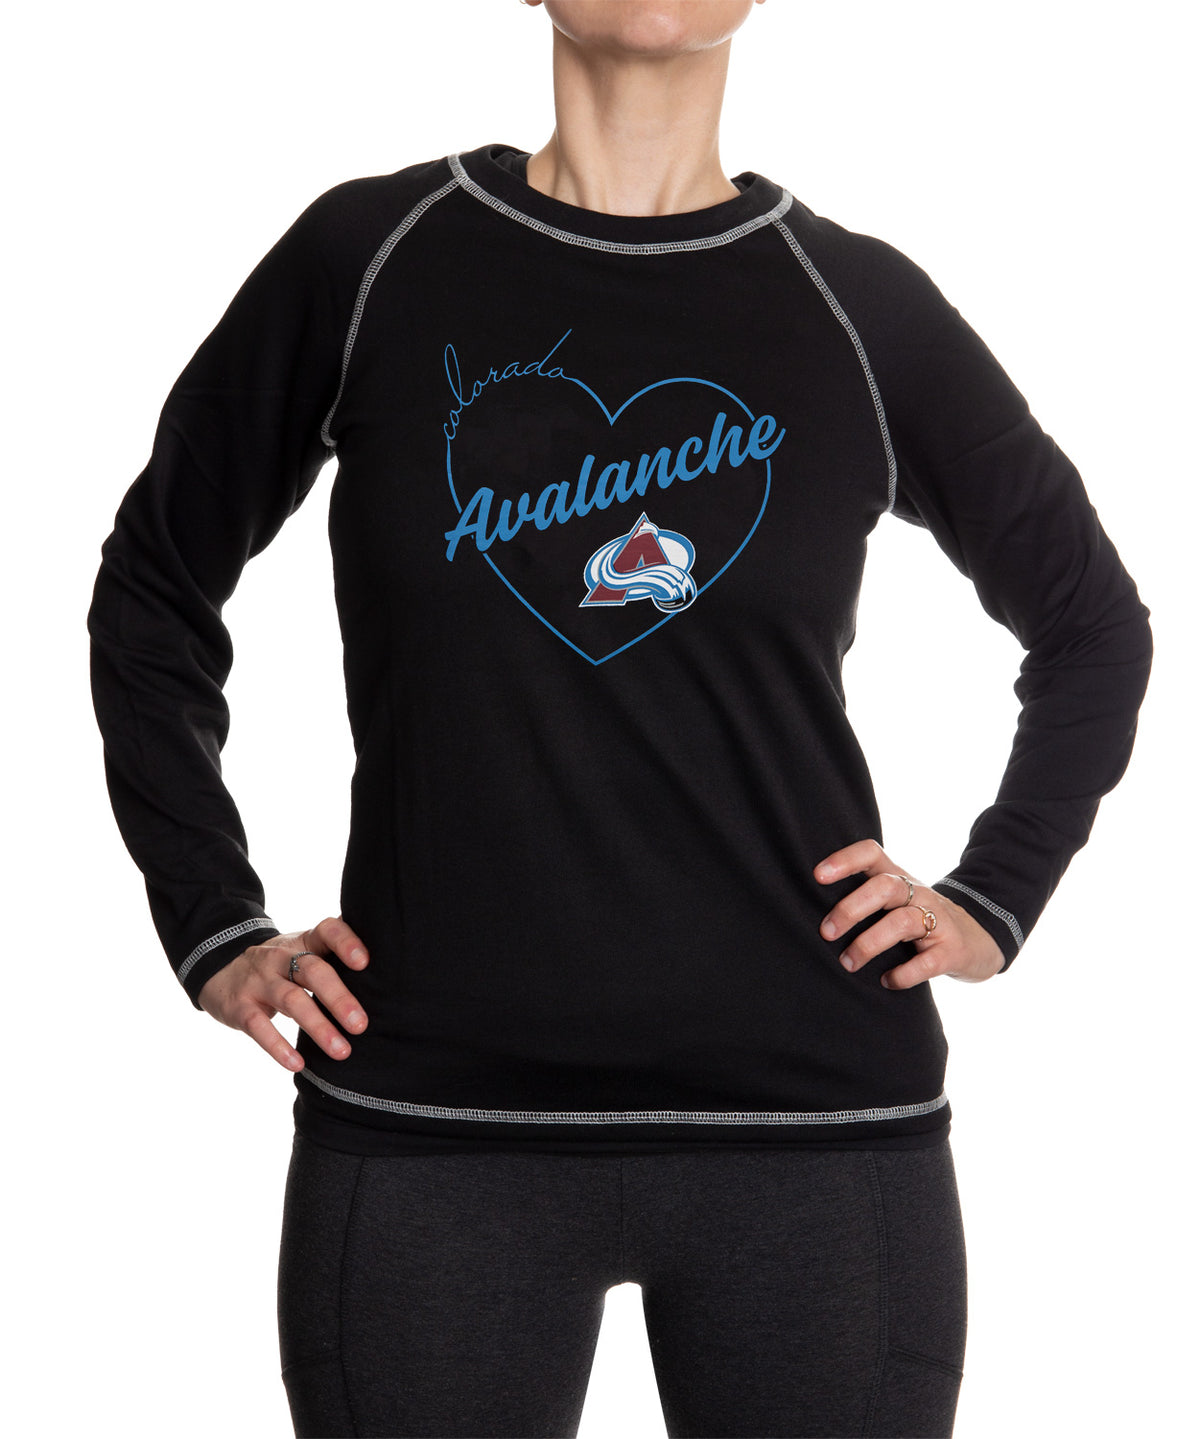 Colorado Avalanche Distressed Logo Long Sleeve Shirt for Women